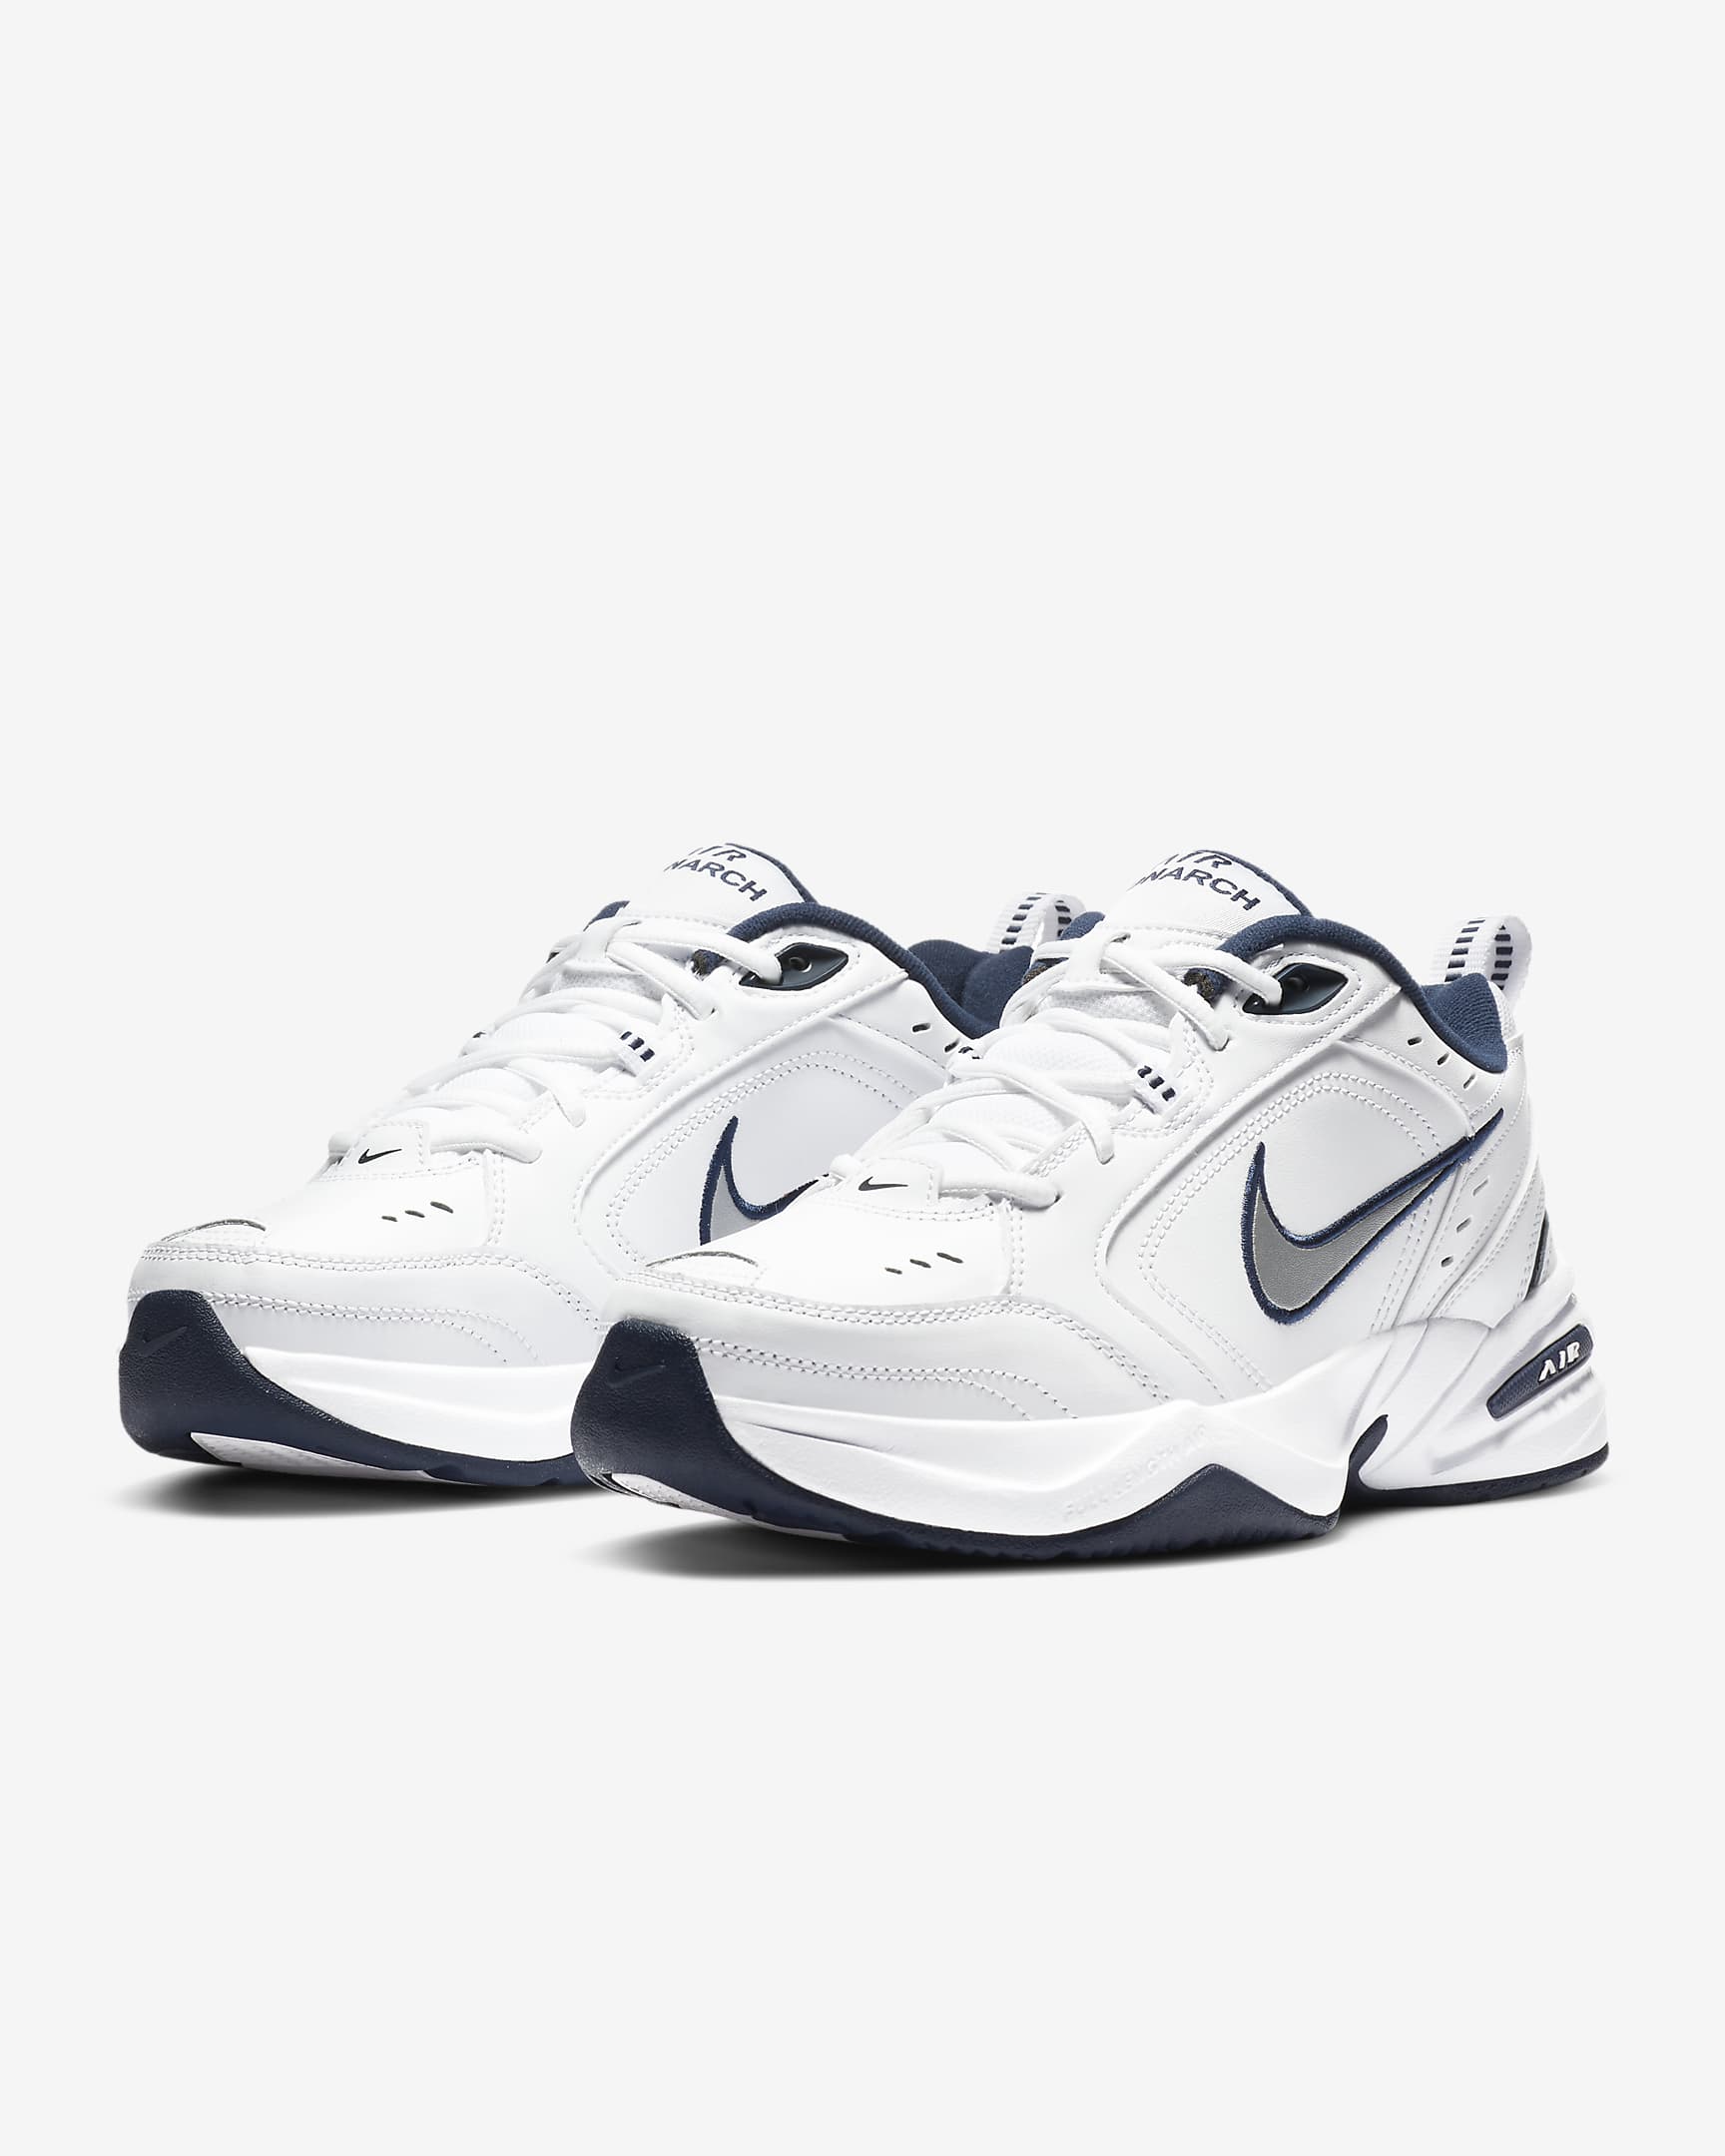 Nike Air Monarch IV Review: The Shoe That Has Fitness Gurus and ...